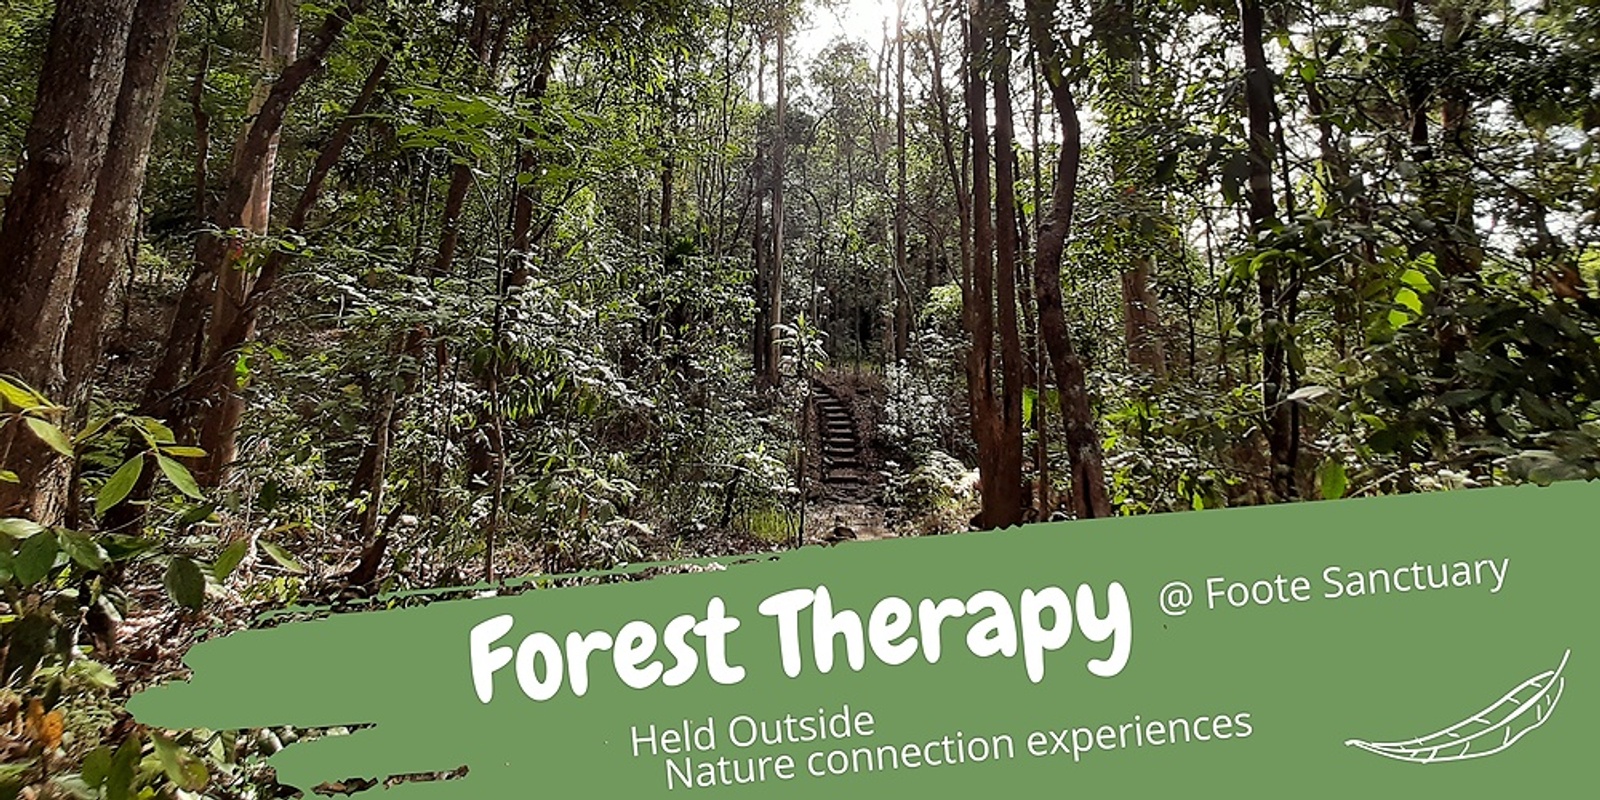 Forest Therapy at Foote Sanctuary 2 Sep 23